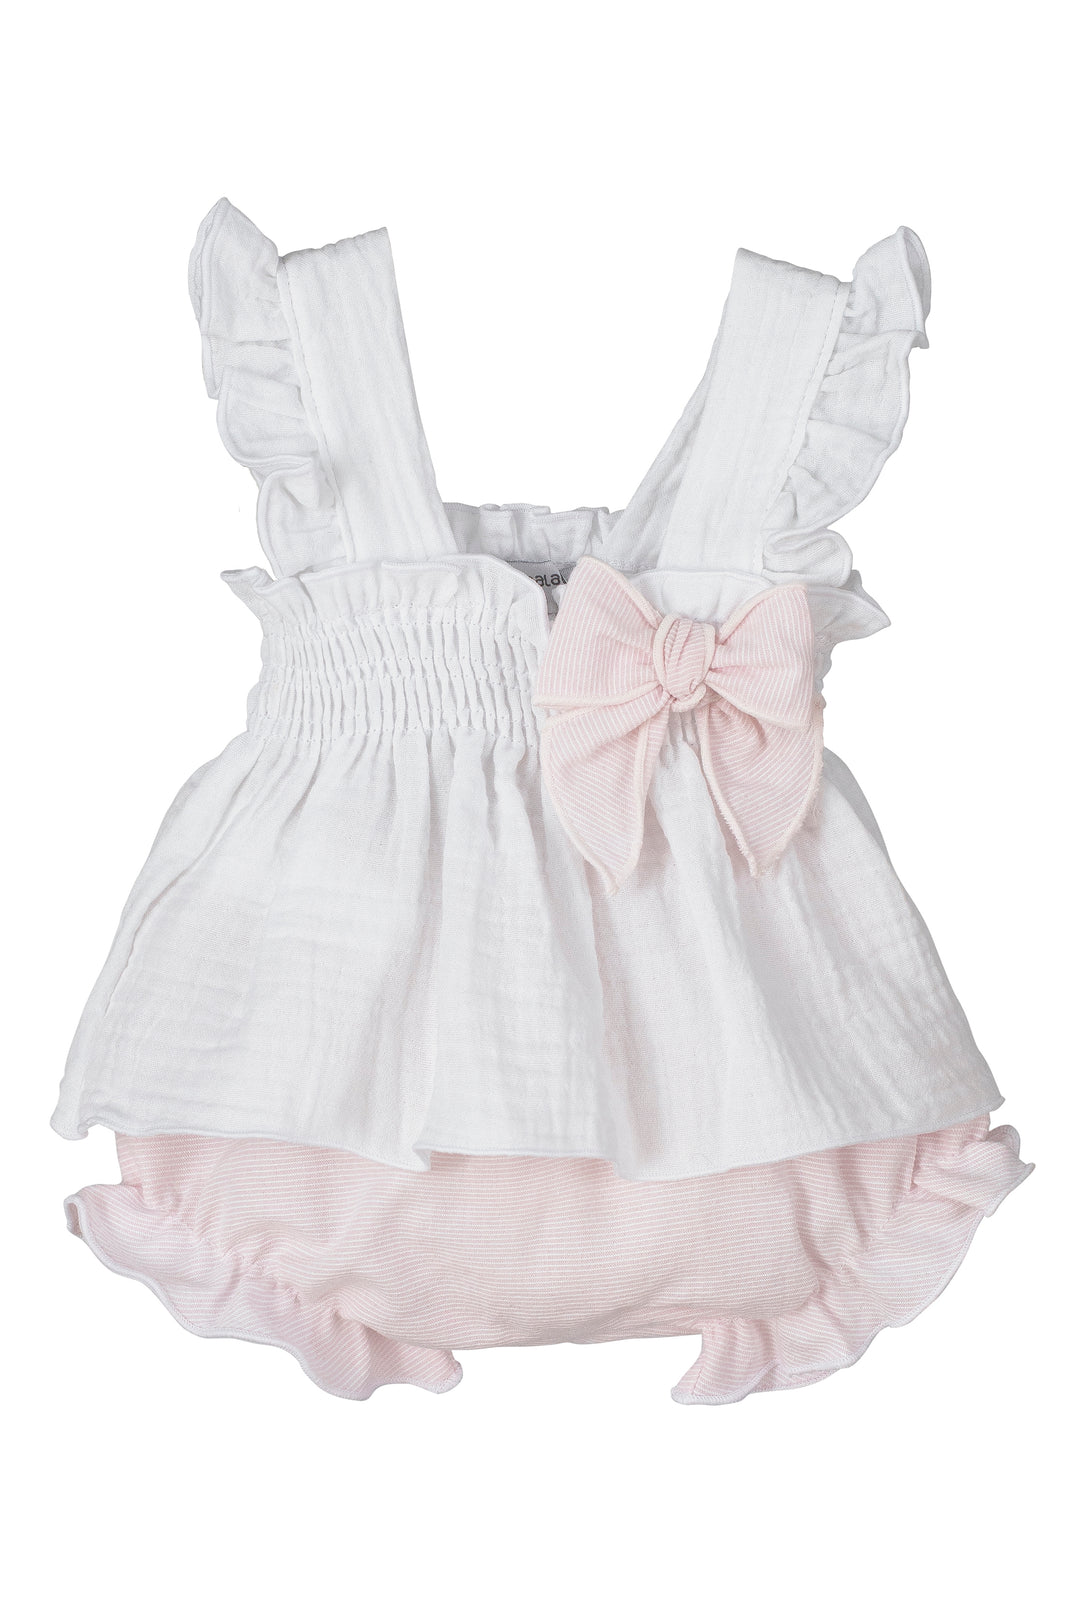 Calamaro PREORDER "Olivia" Cheesecloth Blouse & Pink Bloomers | Millie and John